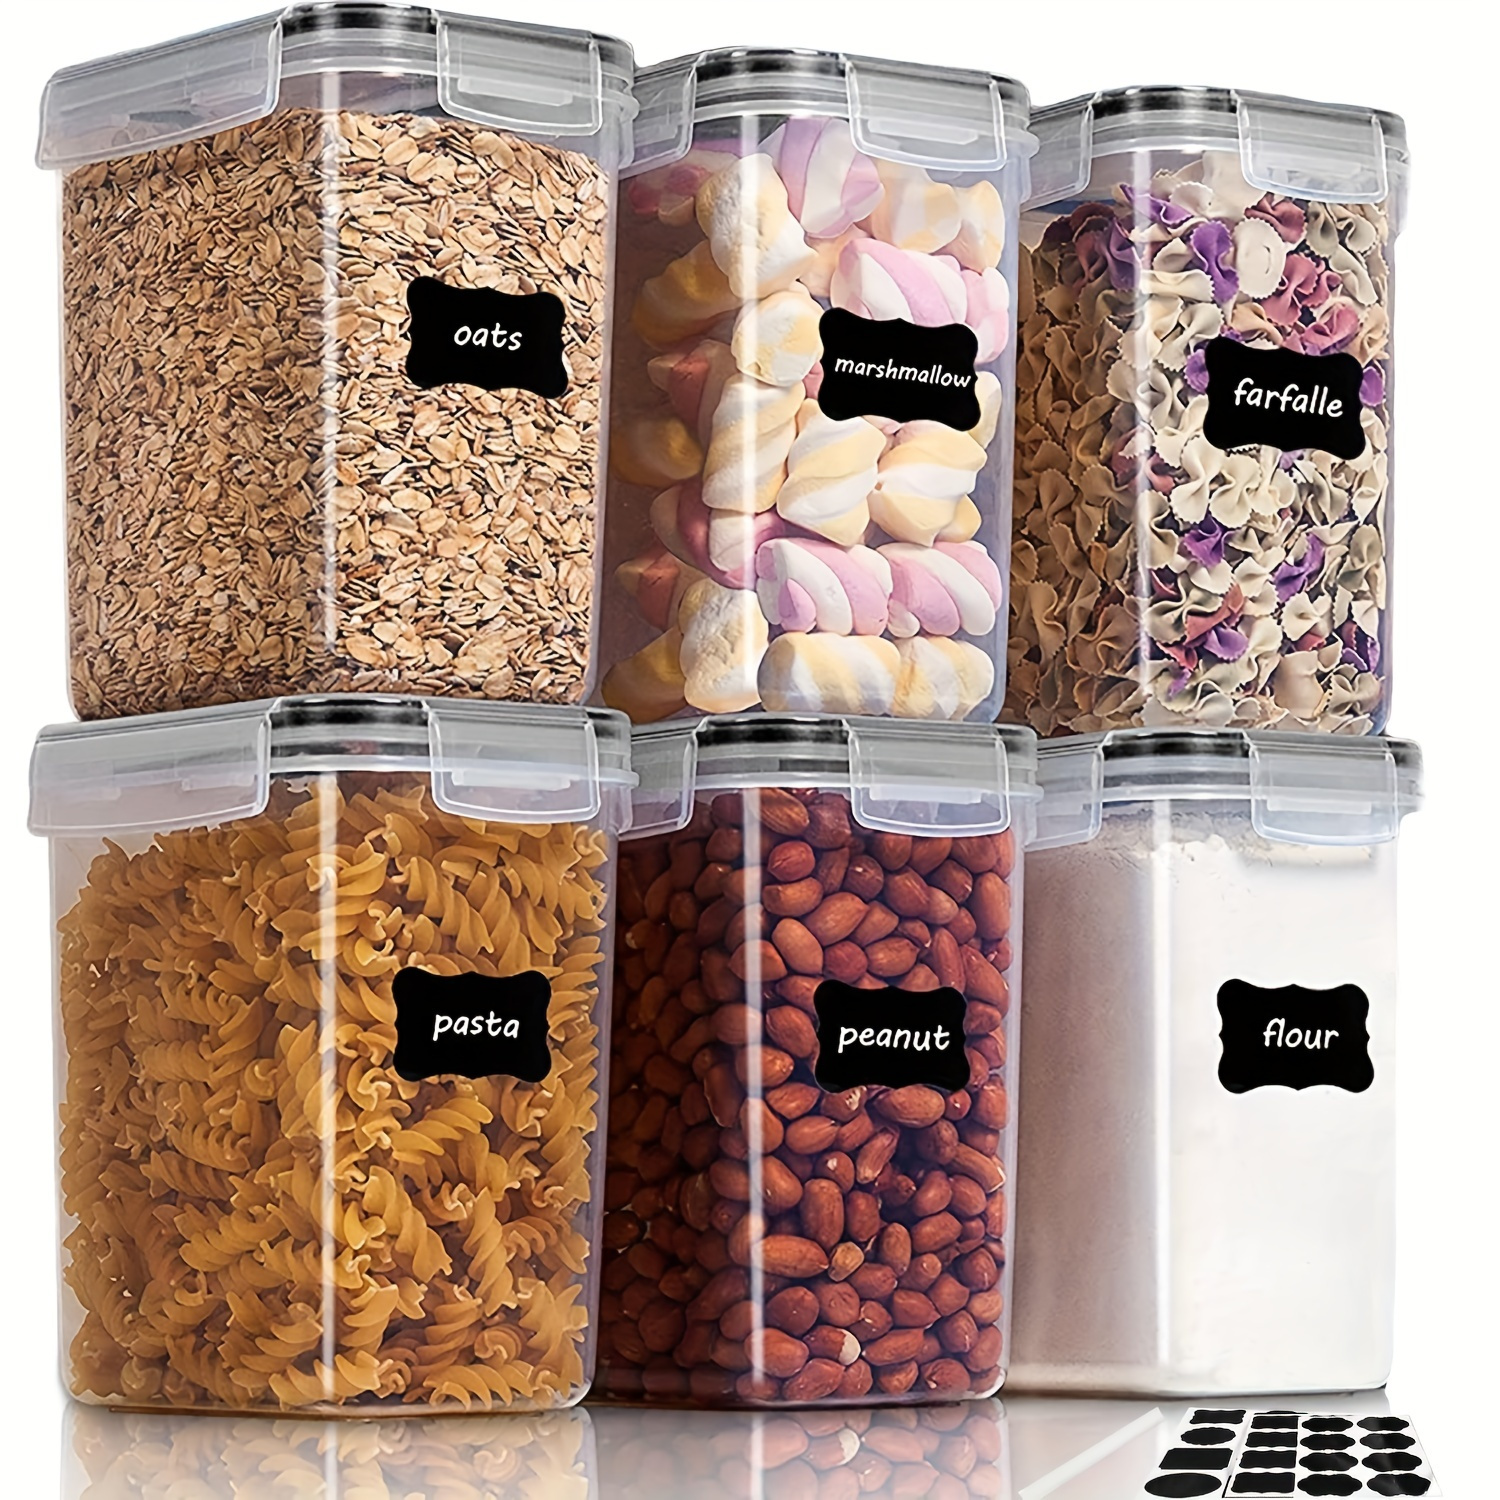 6pcs Airtight Food Storage Container With Lid - Bpa-free Plastic